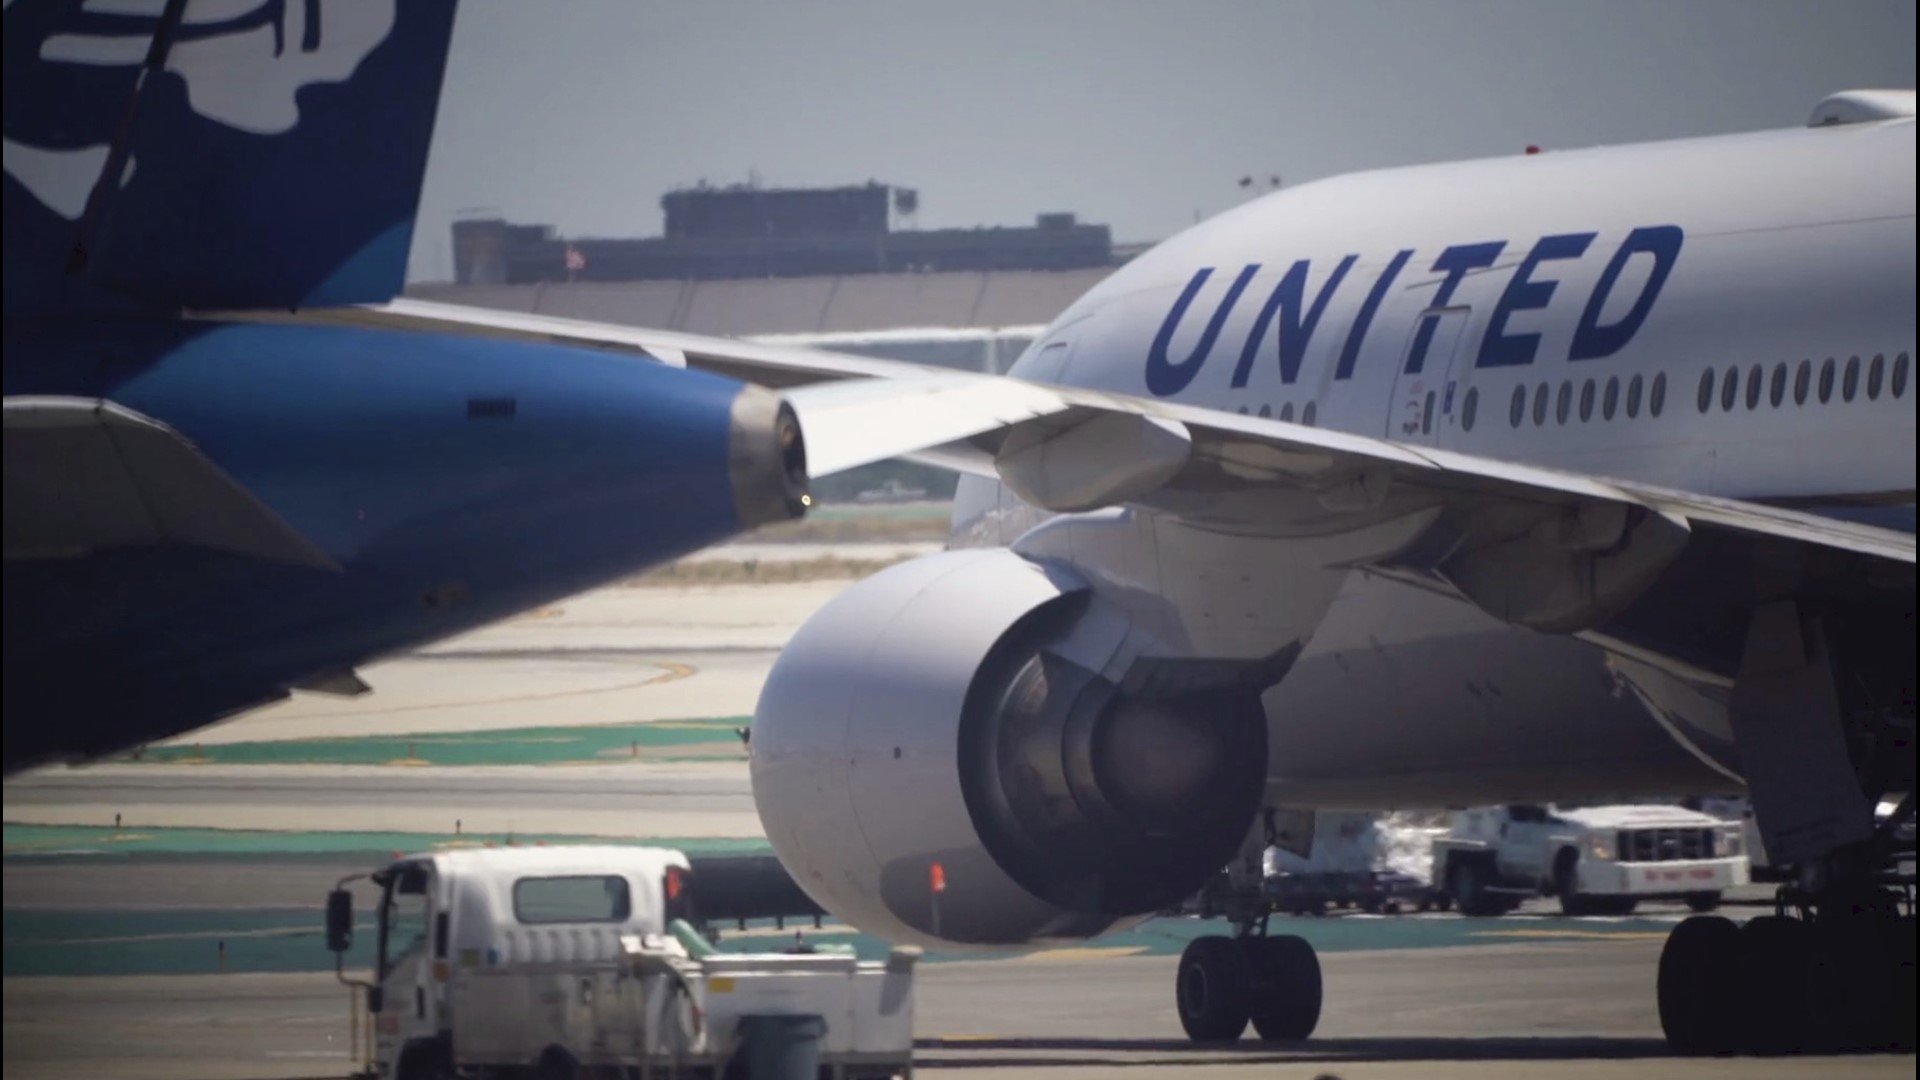 As a way to give business a bounce during the pandemic, United Airlines said it will be getting rid of its $200 ticket-change fee. Veuer's Justin Kircher has the story.